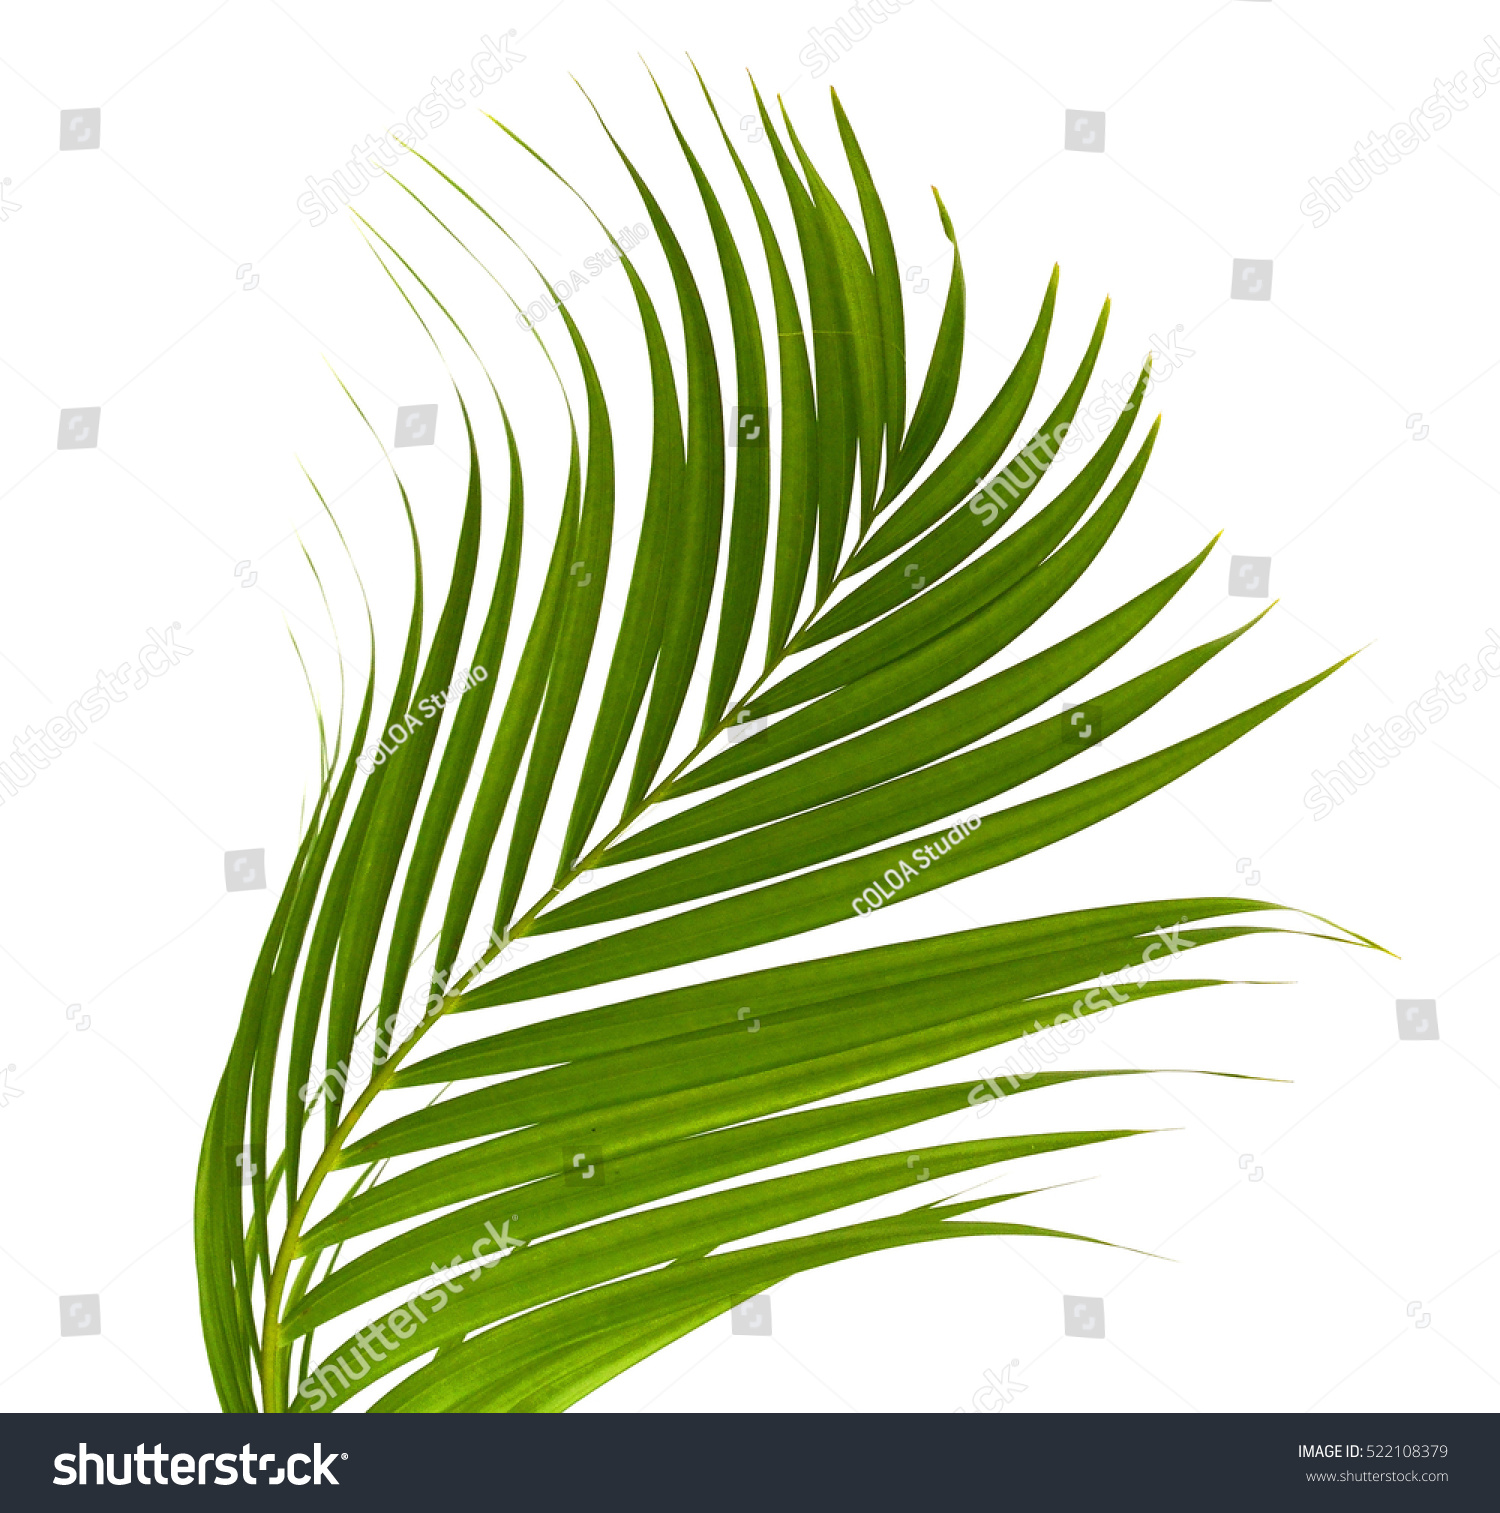 Leaves Coconut Tree Isolated On White Stock Photo 522108379 - Shutterstock